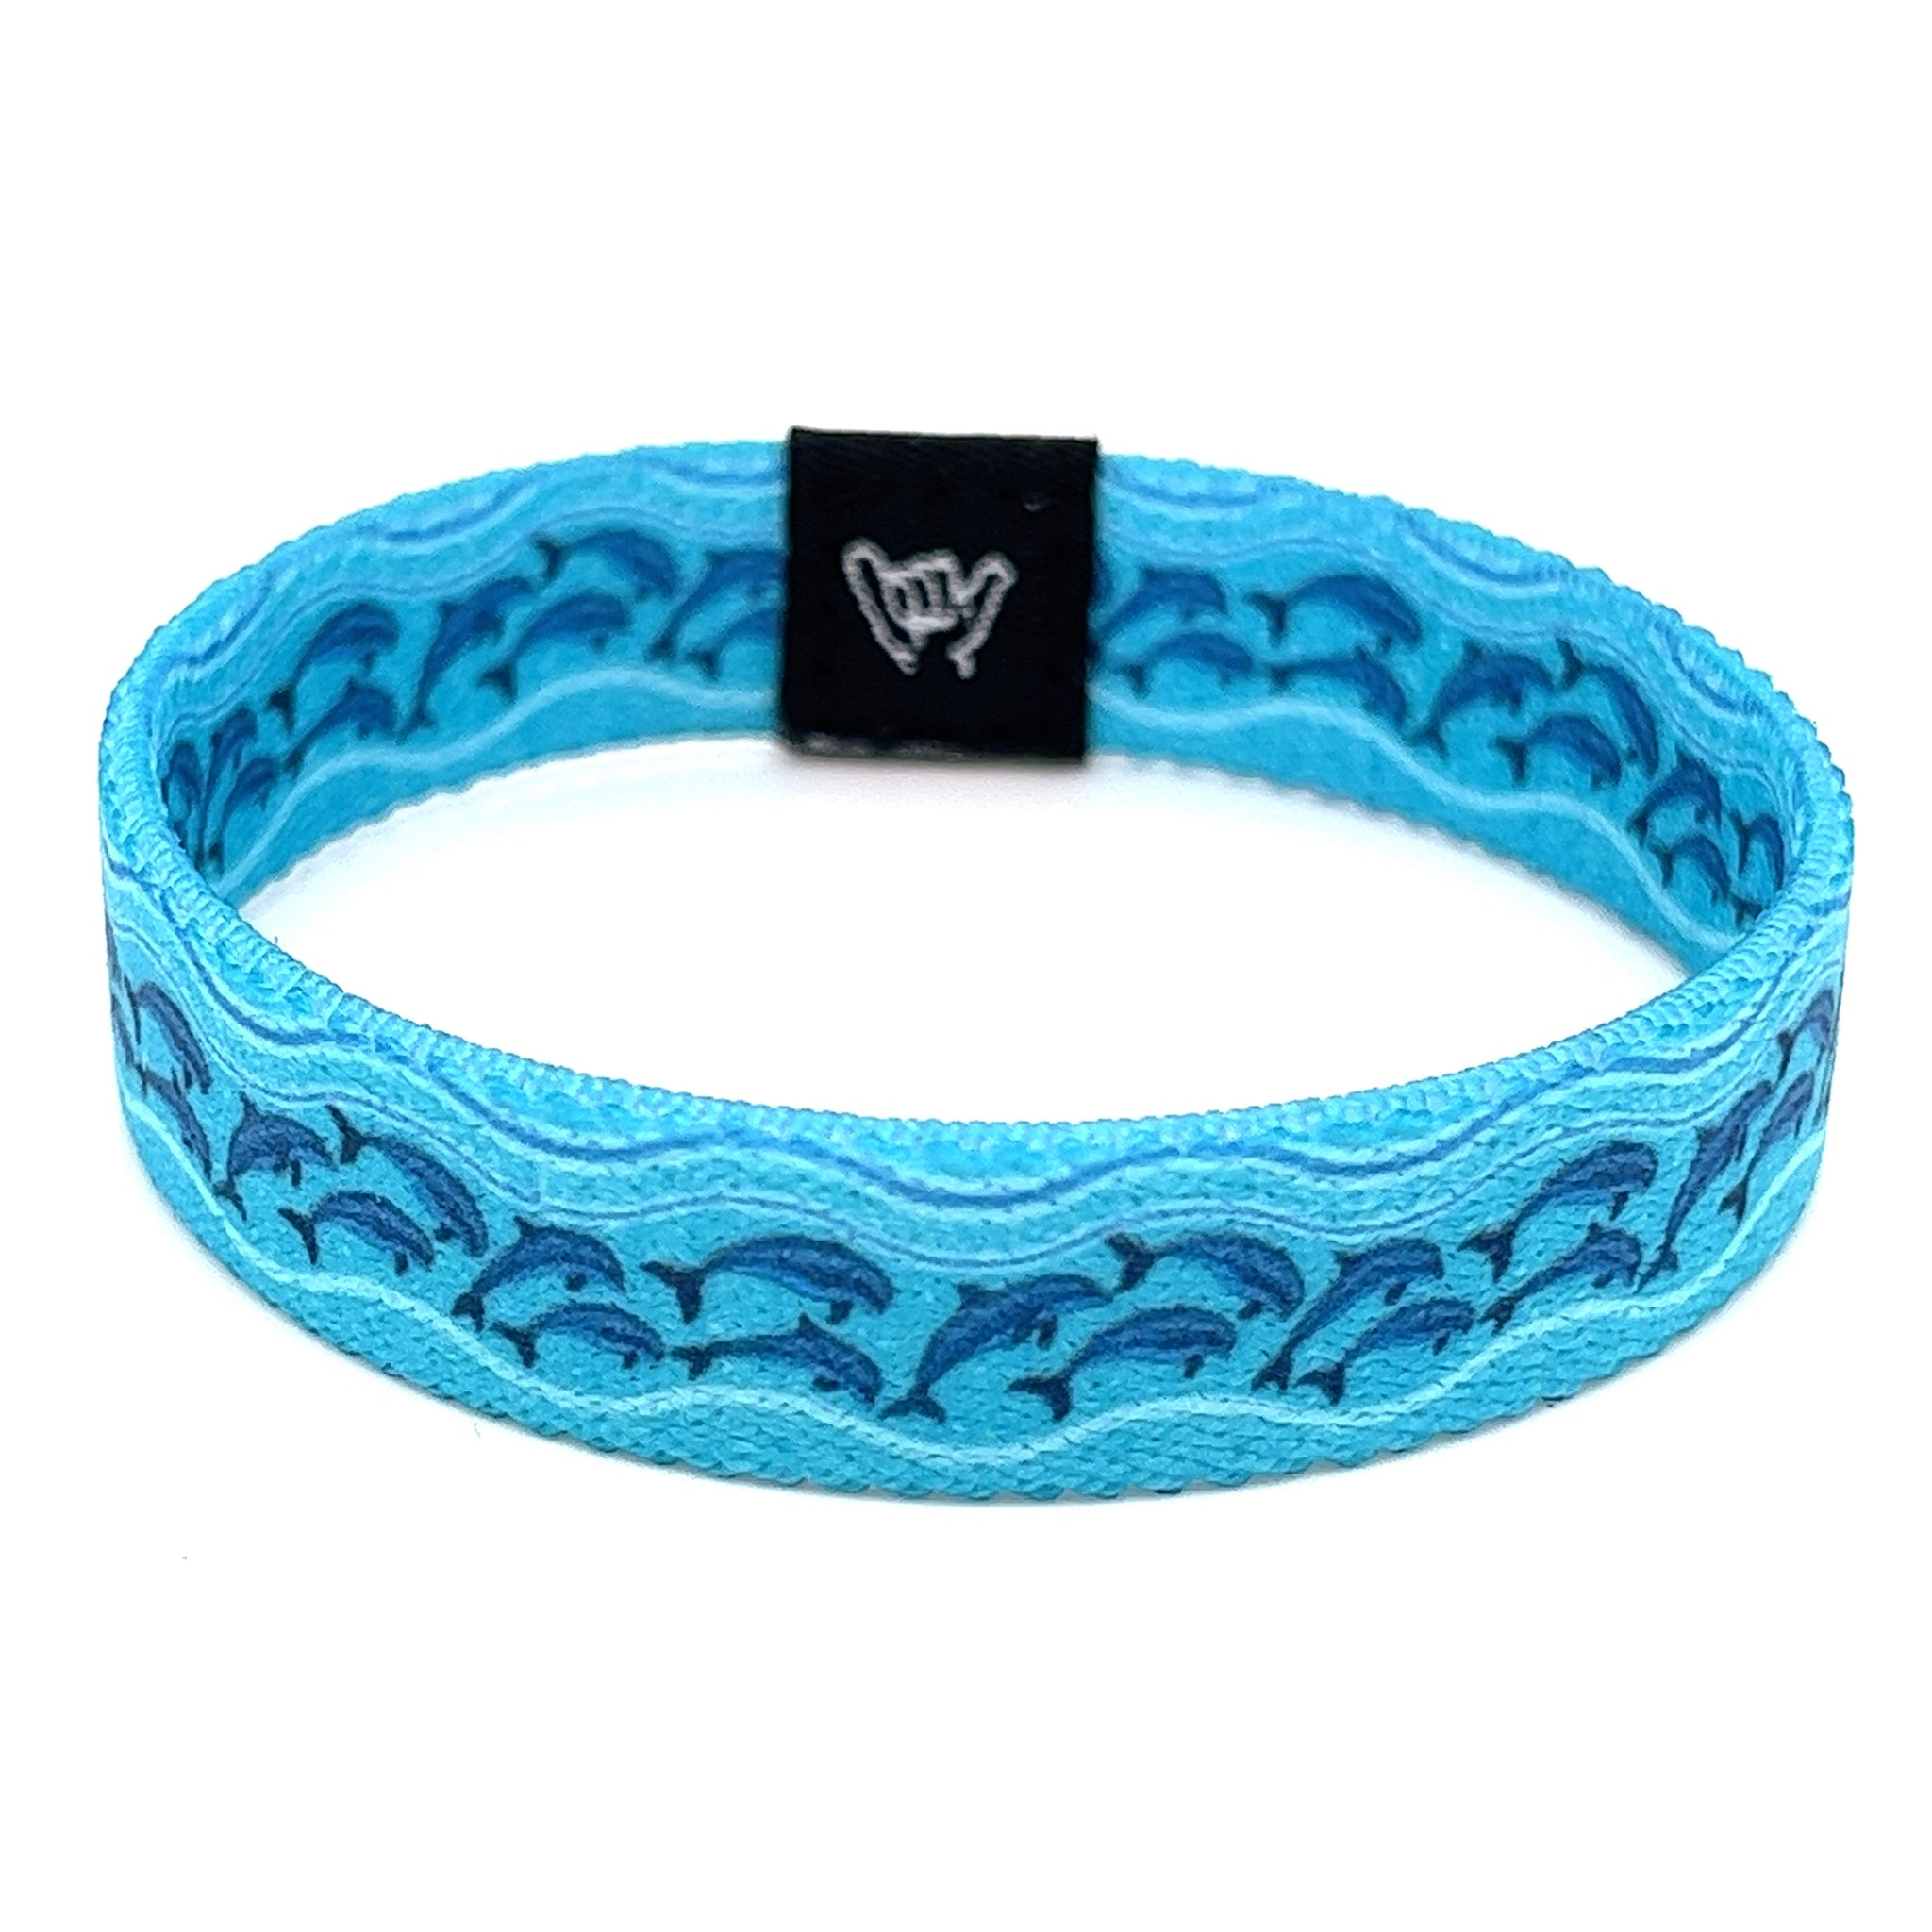 Wristband of Hang Loose – School Dolphins Bracelet Bands